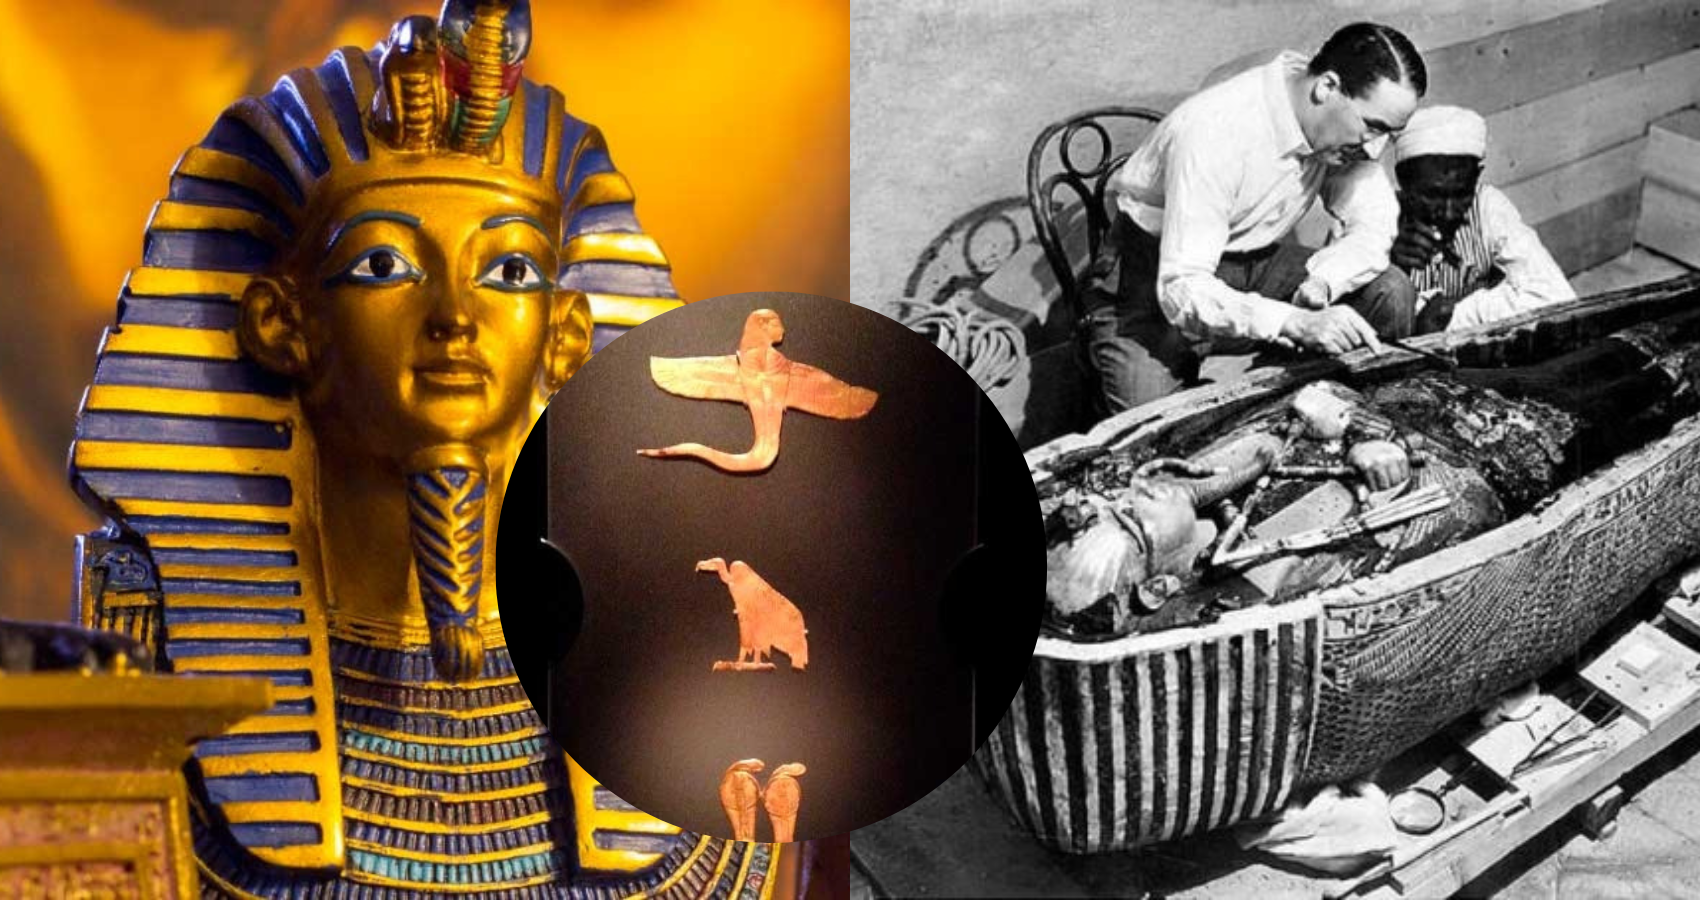 King Tut’s Tomb Was “Raided” By Artifact Thief Howard Carter